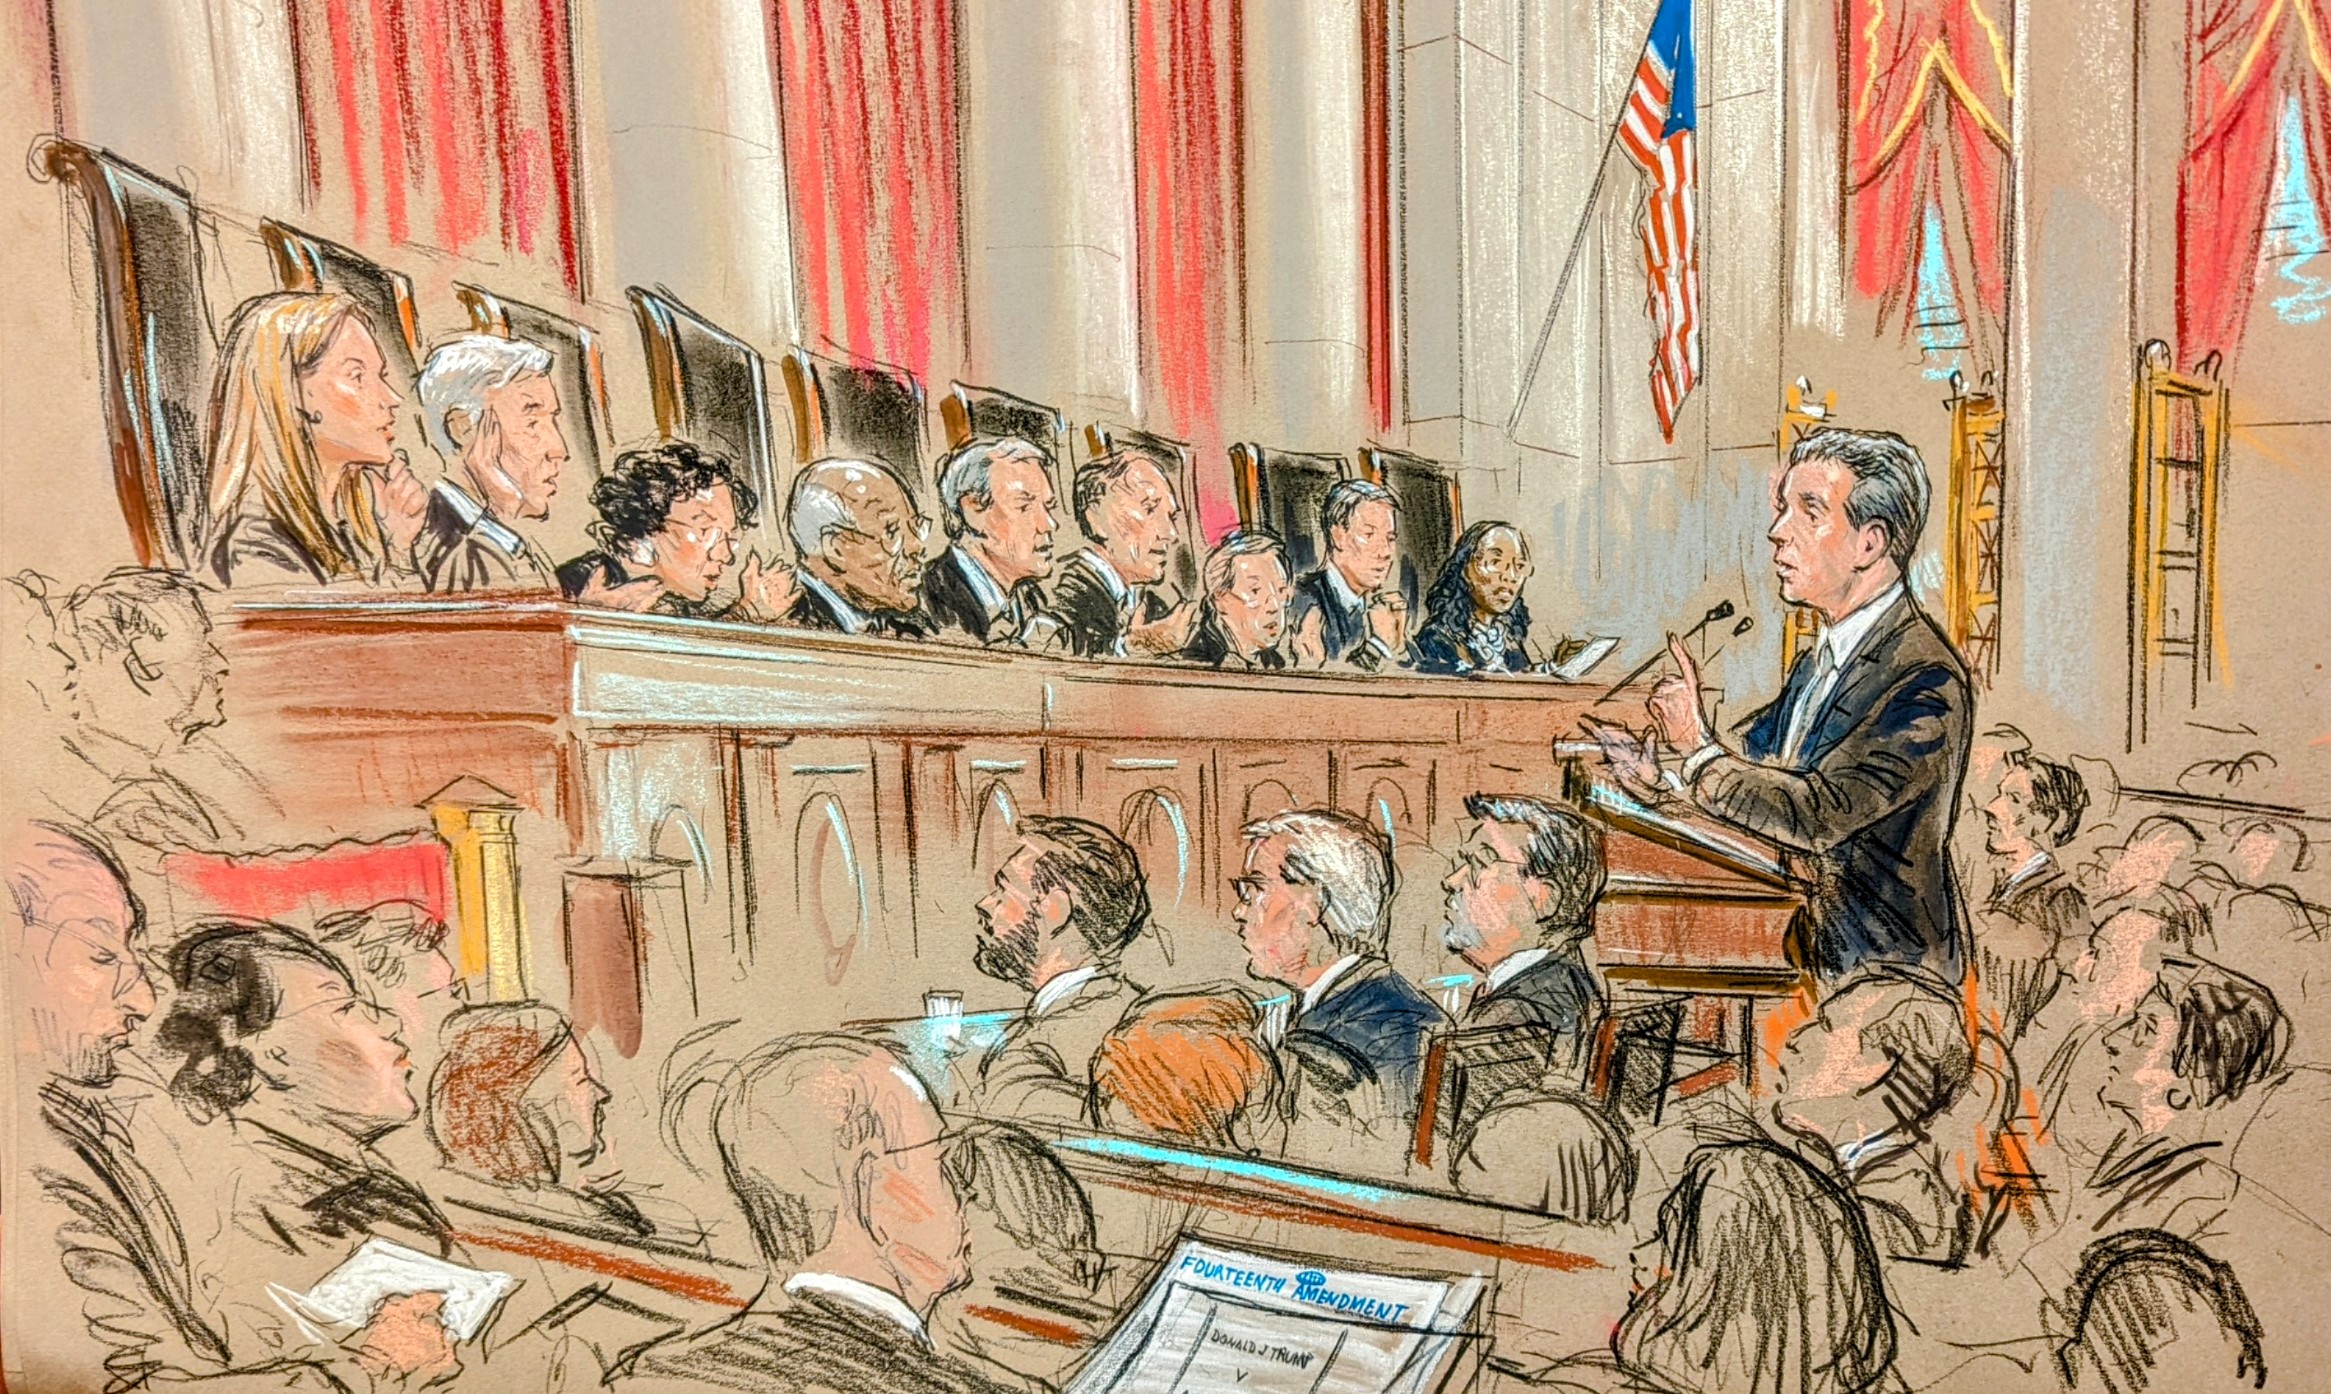 In a packed courtroom, the audience watches as a lawyer stands and argues his case with the nine judges on the bench.